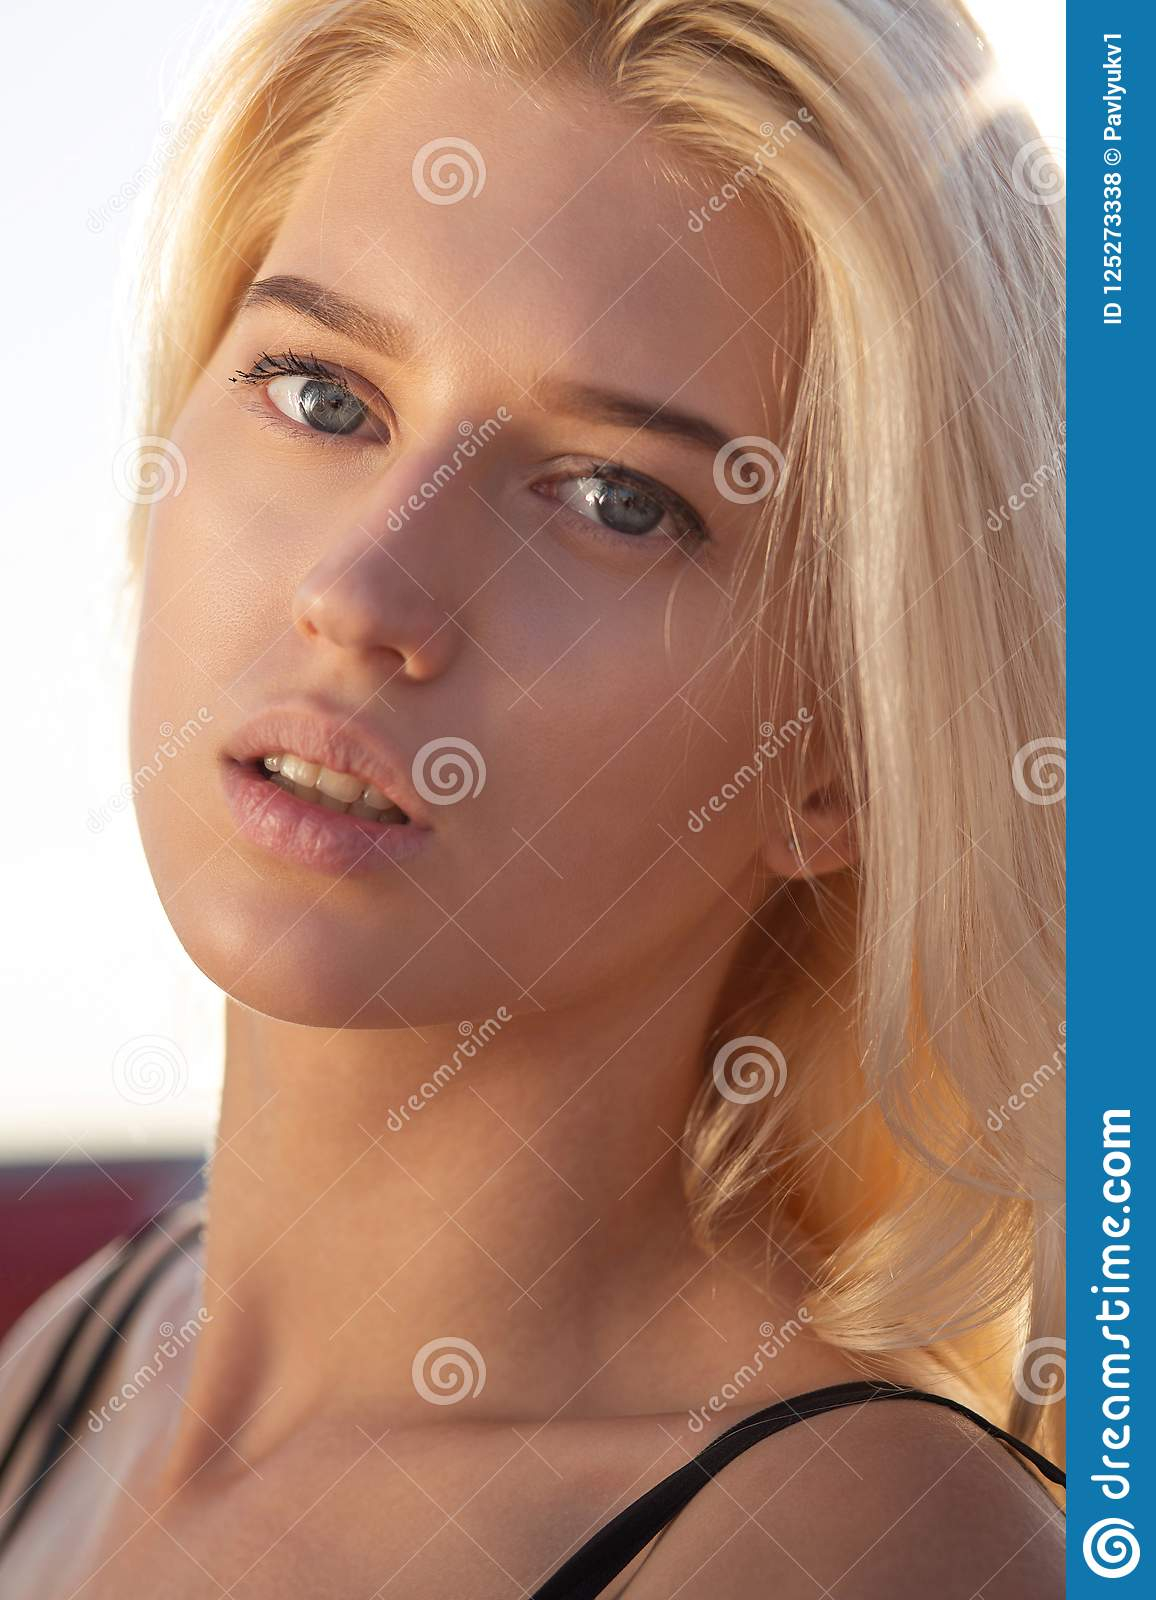 Makeup For Blue Eyes And Blonde Hair Gorgeous Blonde Blue Eyed Model With Natural Makeup And Hair Lo